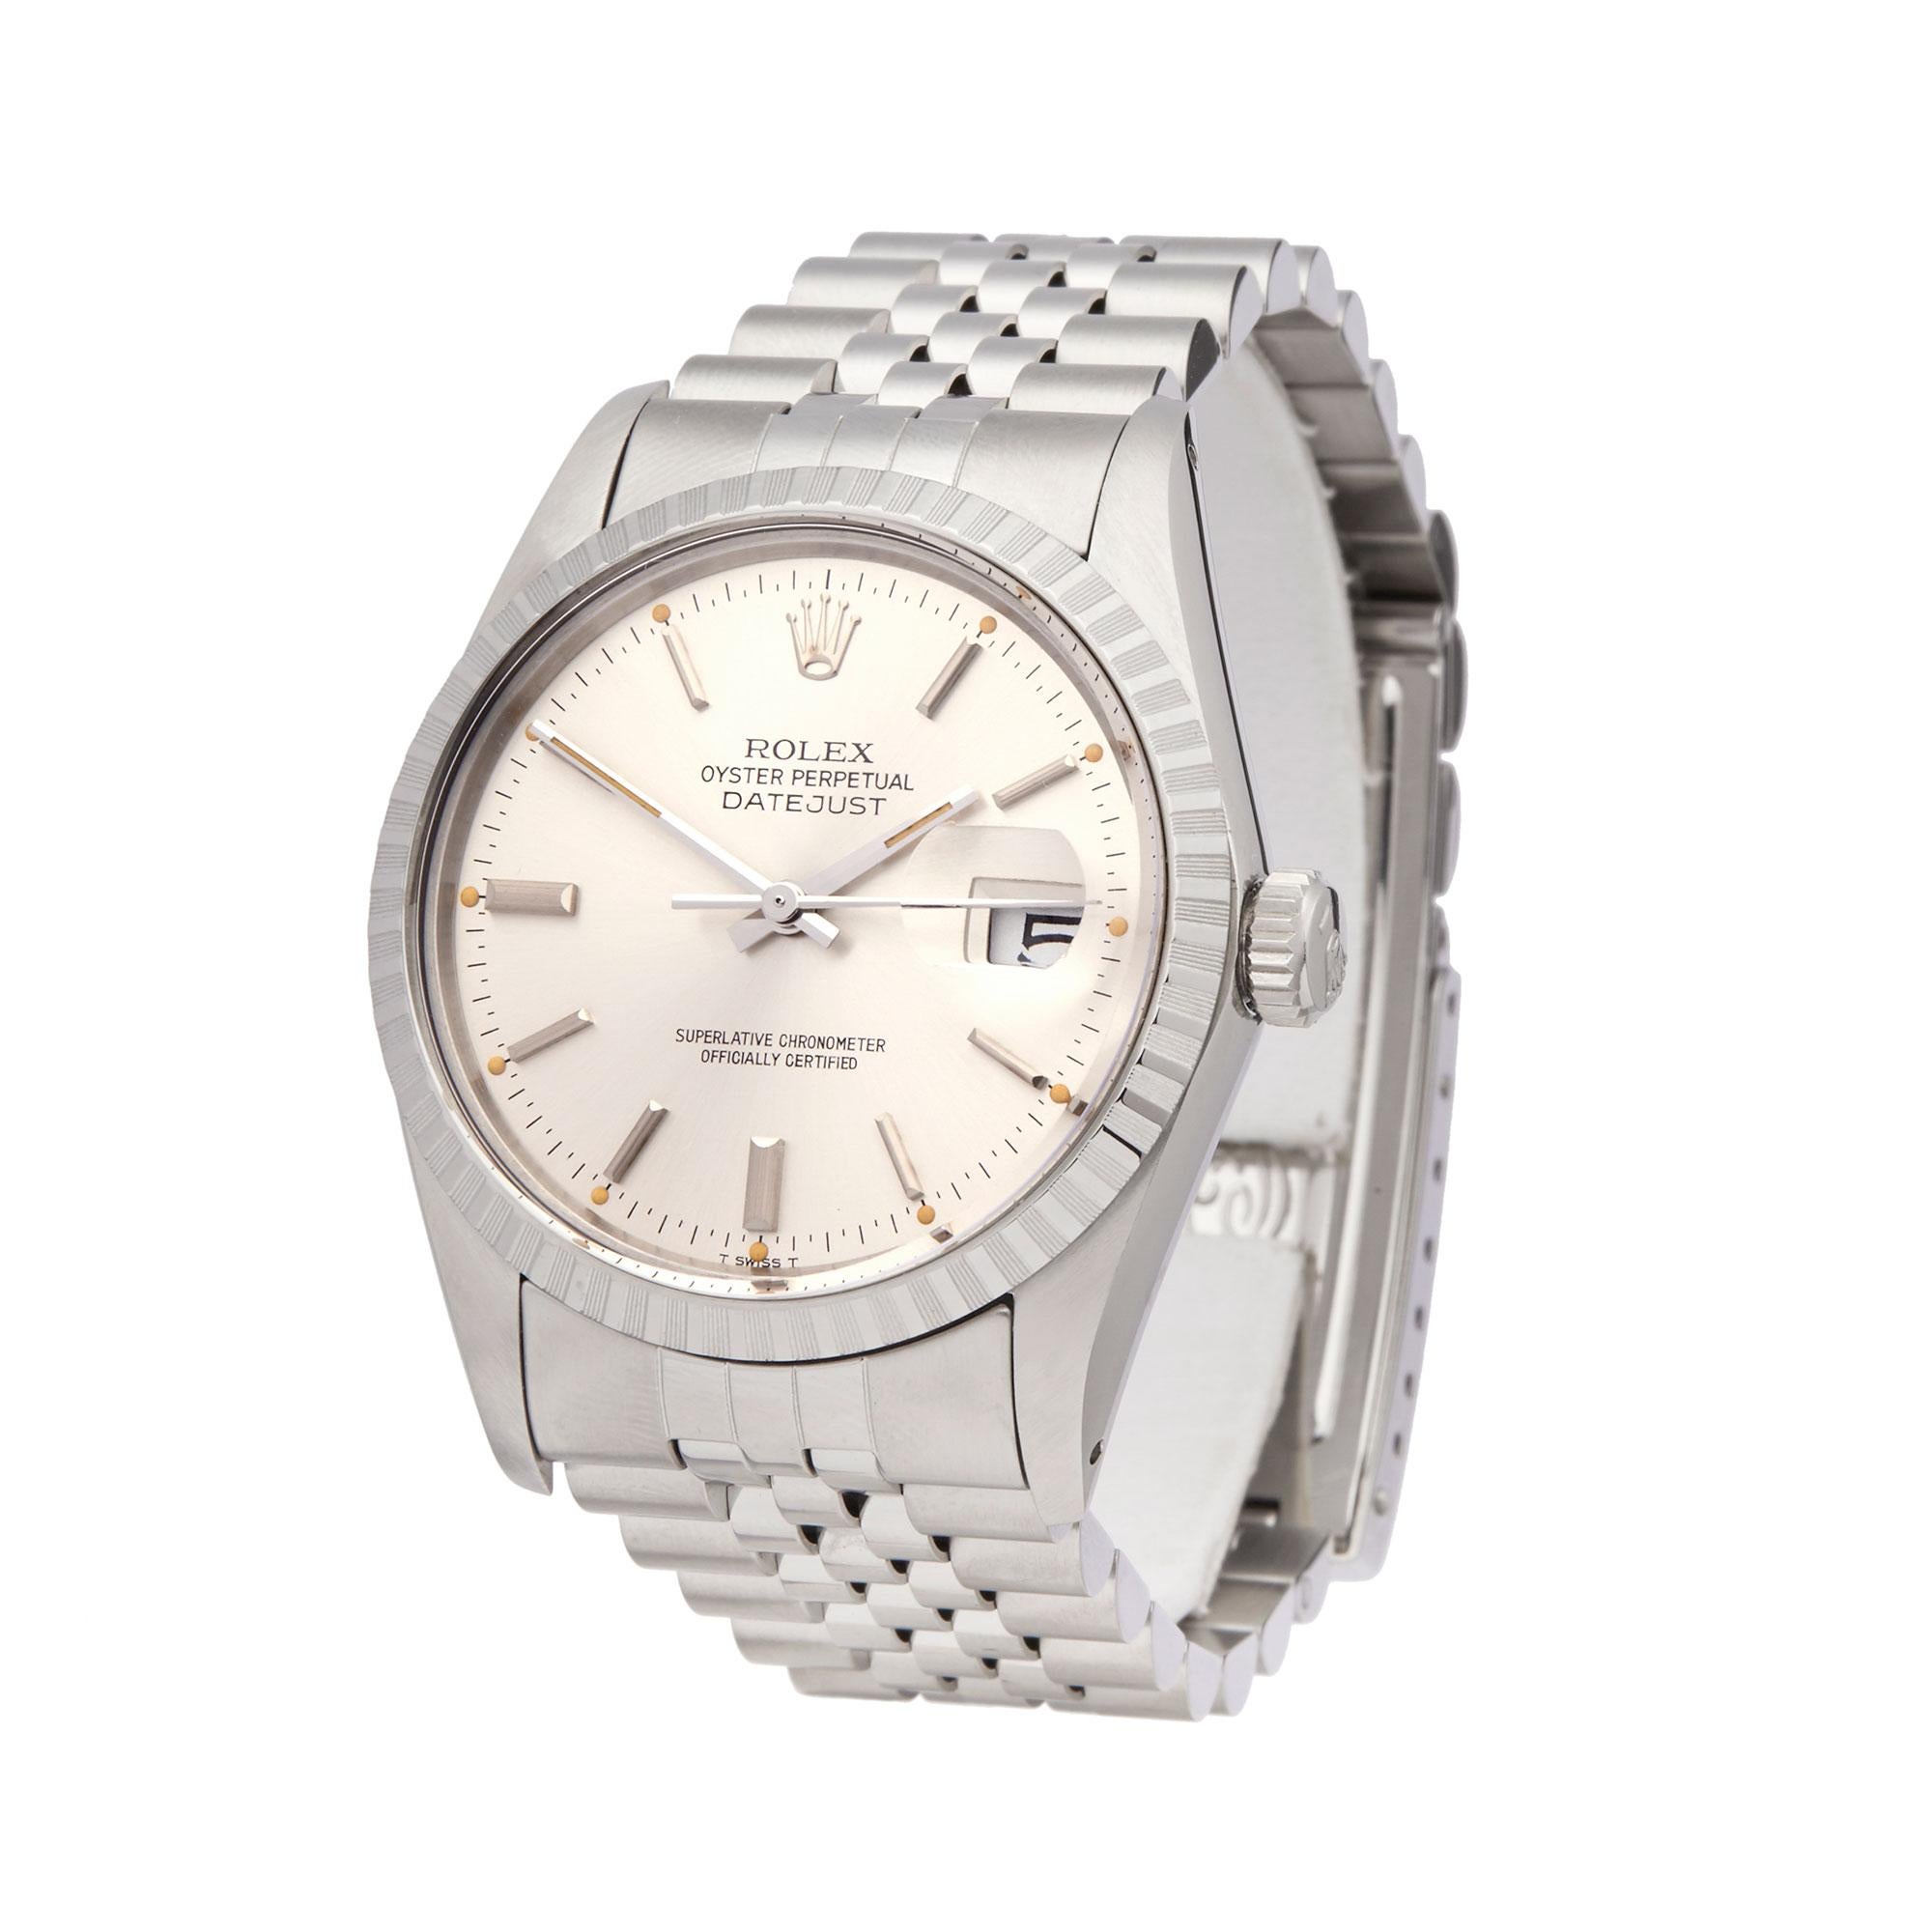 Reference: W5704
Manufacturer: Rolex
Model: Datejust
Model Reference: 16030
Age: Circa 1984
Gender: Men's
Box and Papers: Box Only
Dial: Silver Baton
Glass: Plexiglass
Movement: Automatic
Water Resistance: To Manufacturers Specifications
Case: